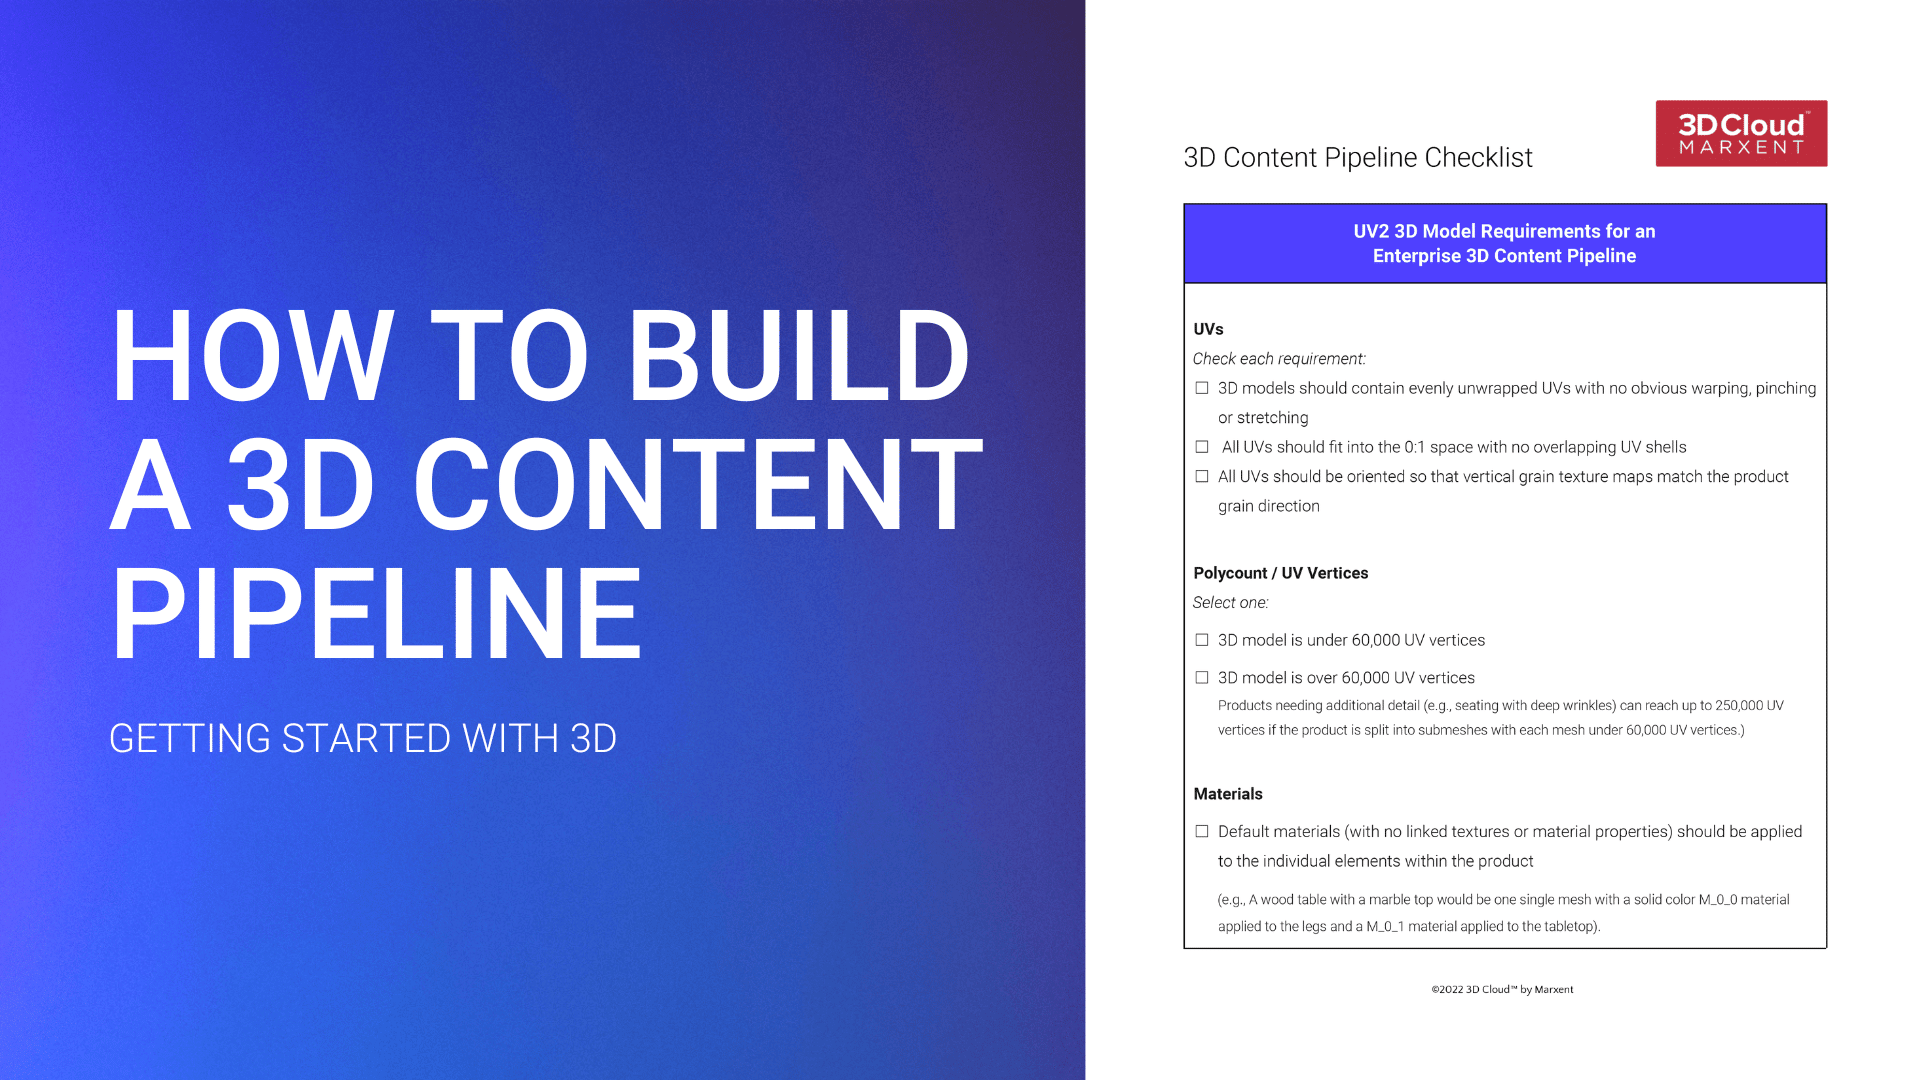 Getting Started with 3D: How to Build a 3D Content Pipeline